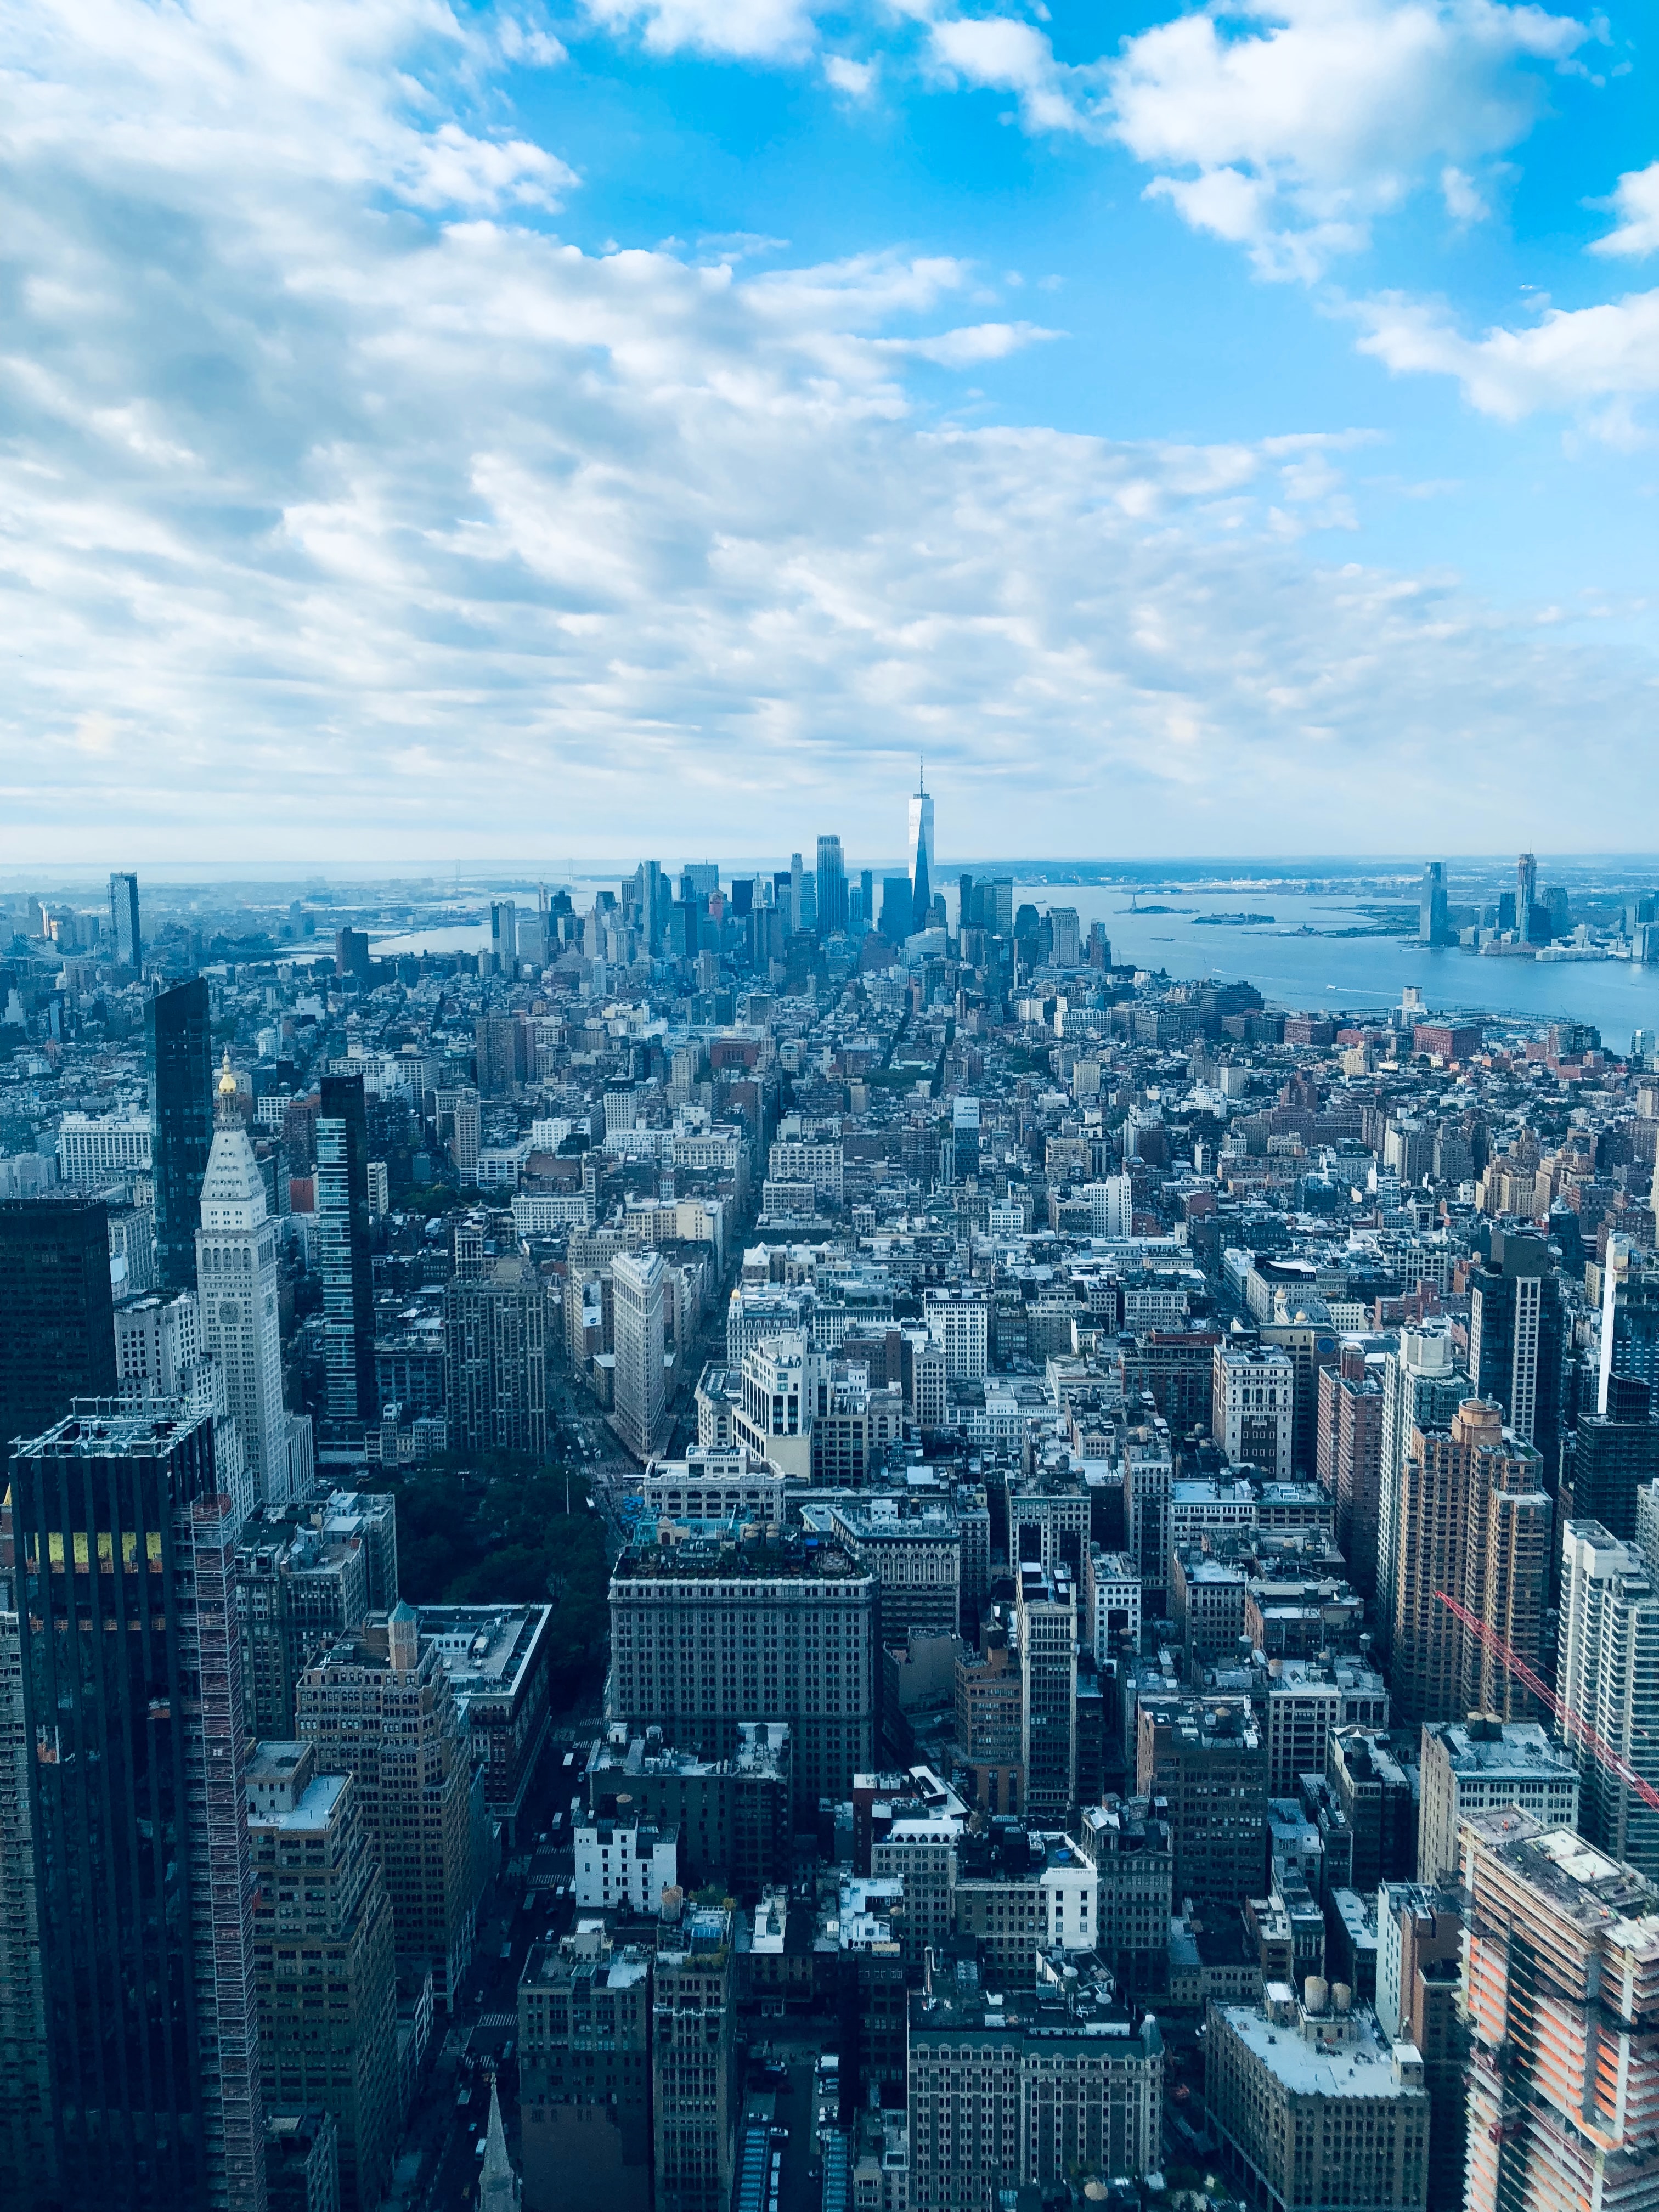 Free HD new york, urban landscape, cities, city, building, view from above, megapolis, megalopolis, cityscape